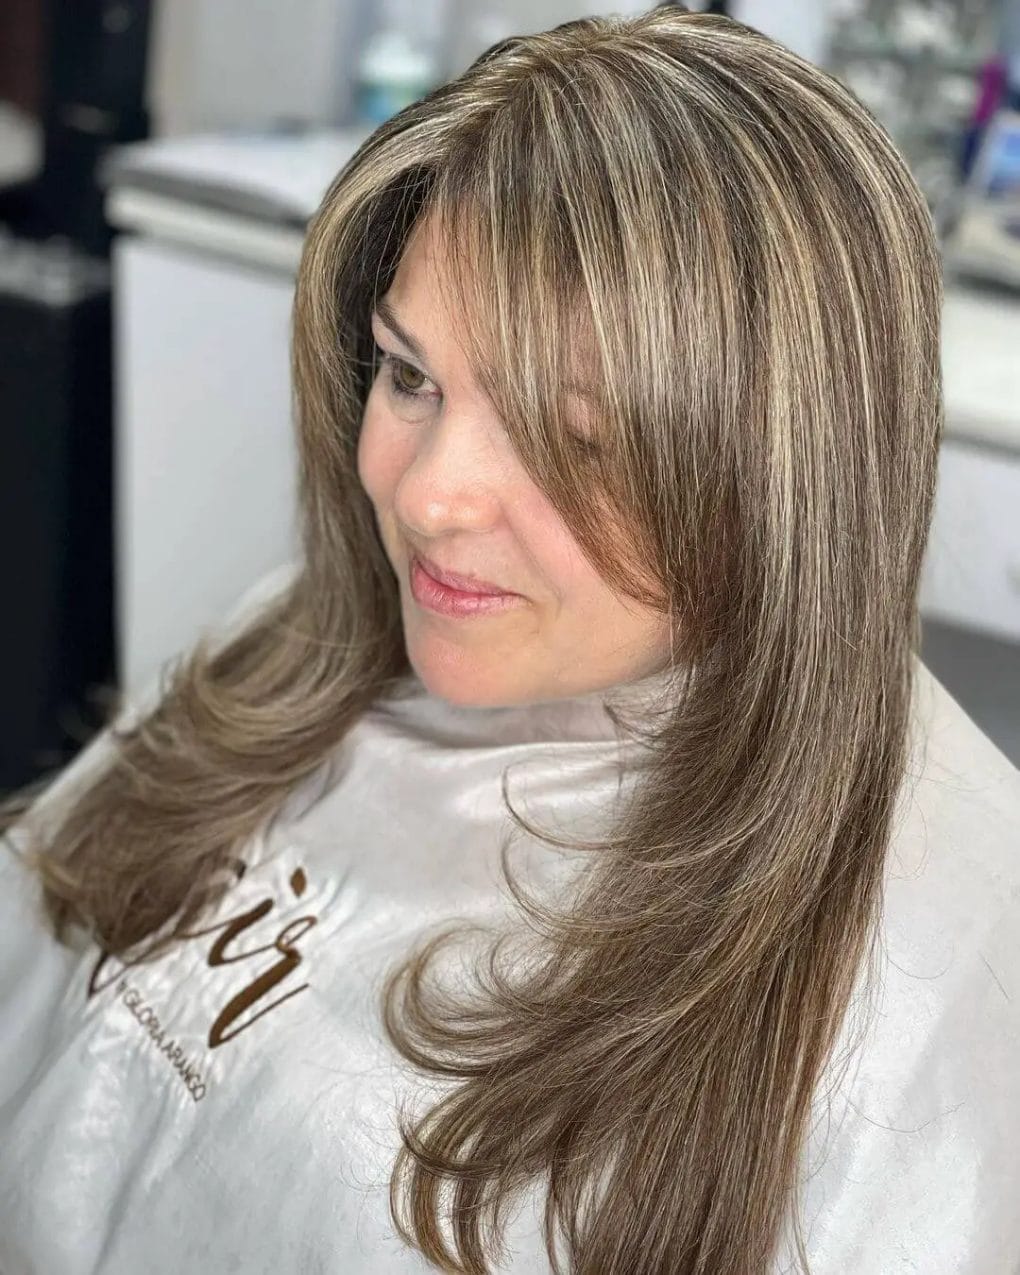 Long layers with curved ends and dimensional highlights for a flattering style.